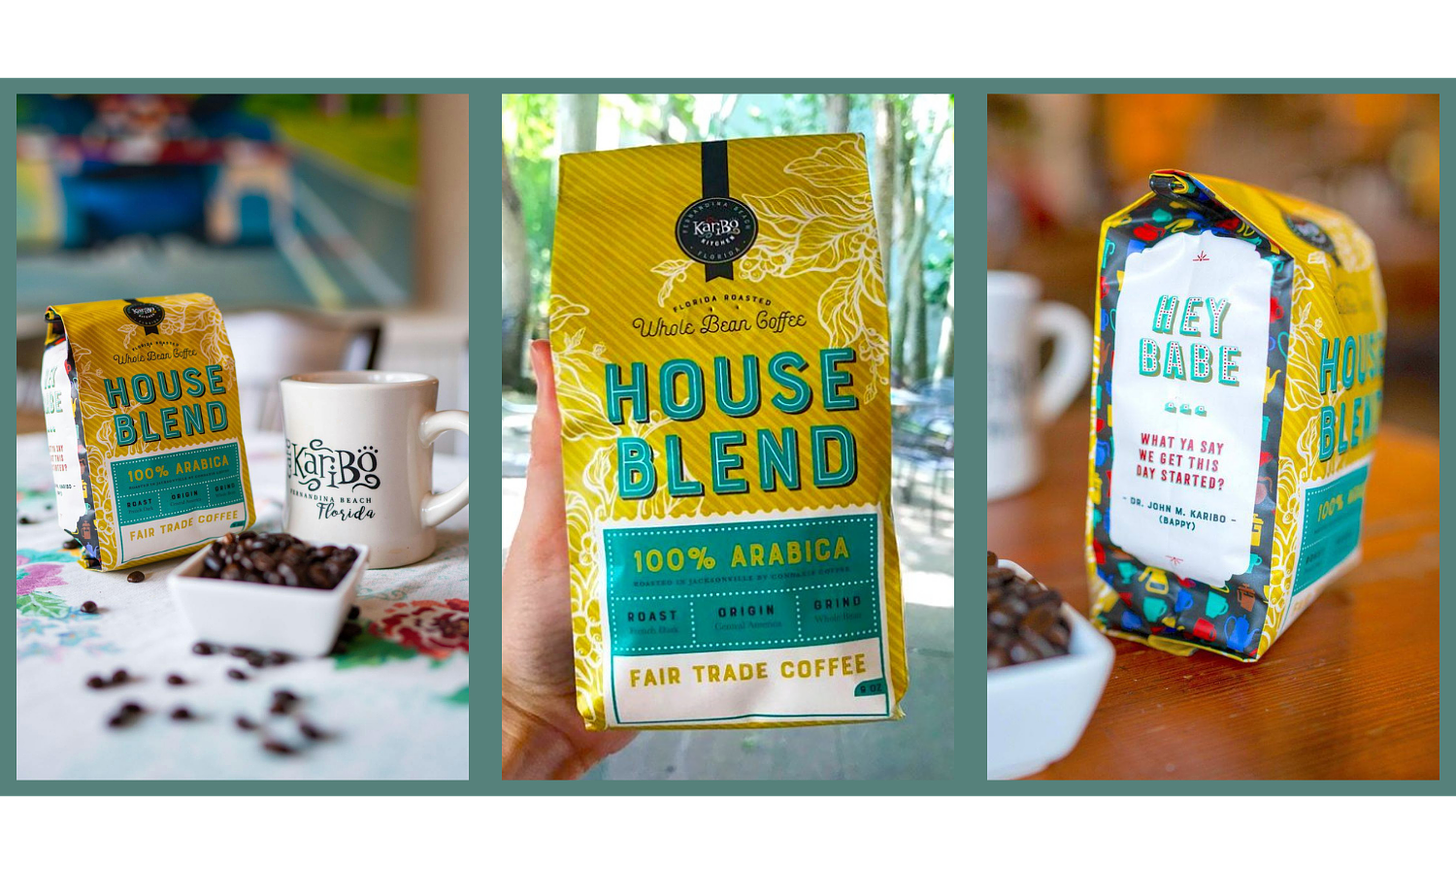 A 3-part set of a coffee bag from the front and sides. The bag is gold with green text that says "House Blend" in green.